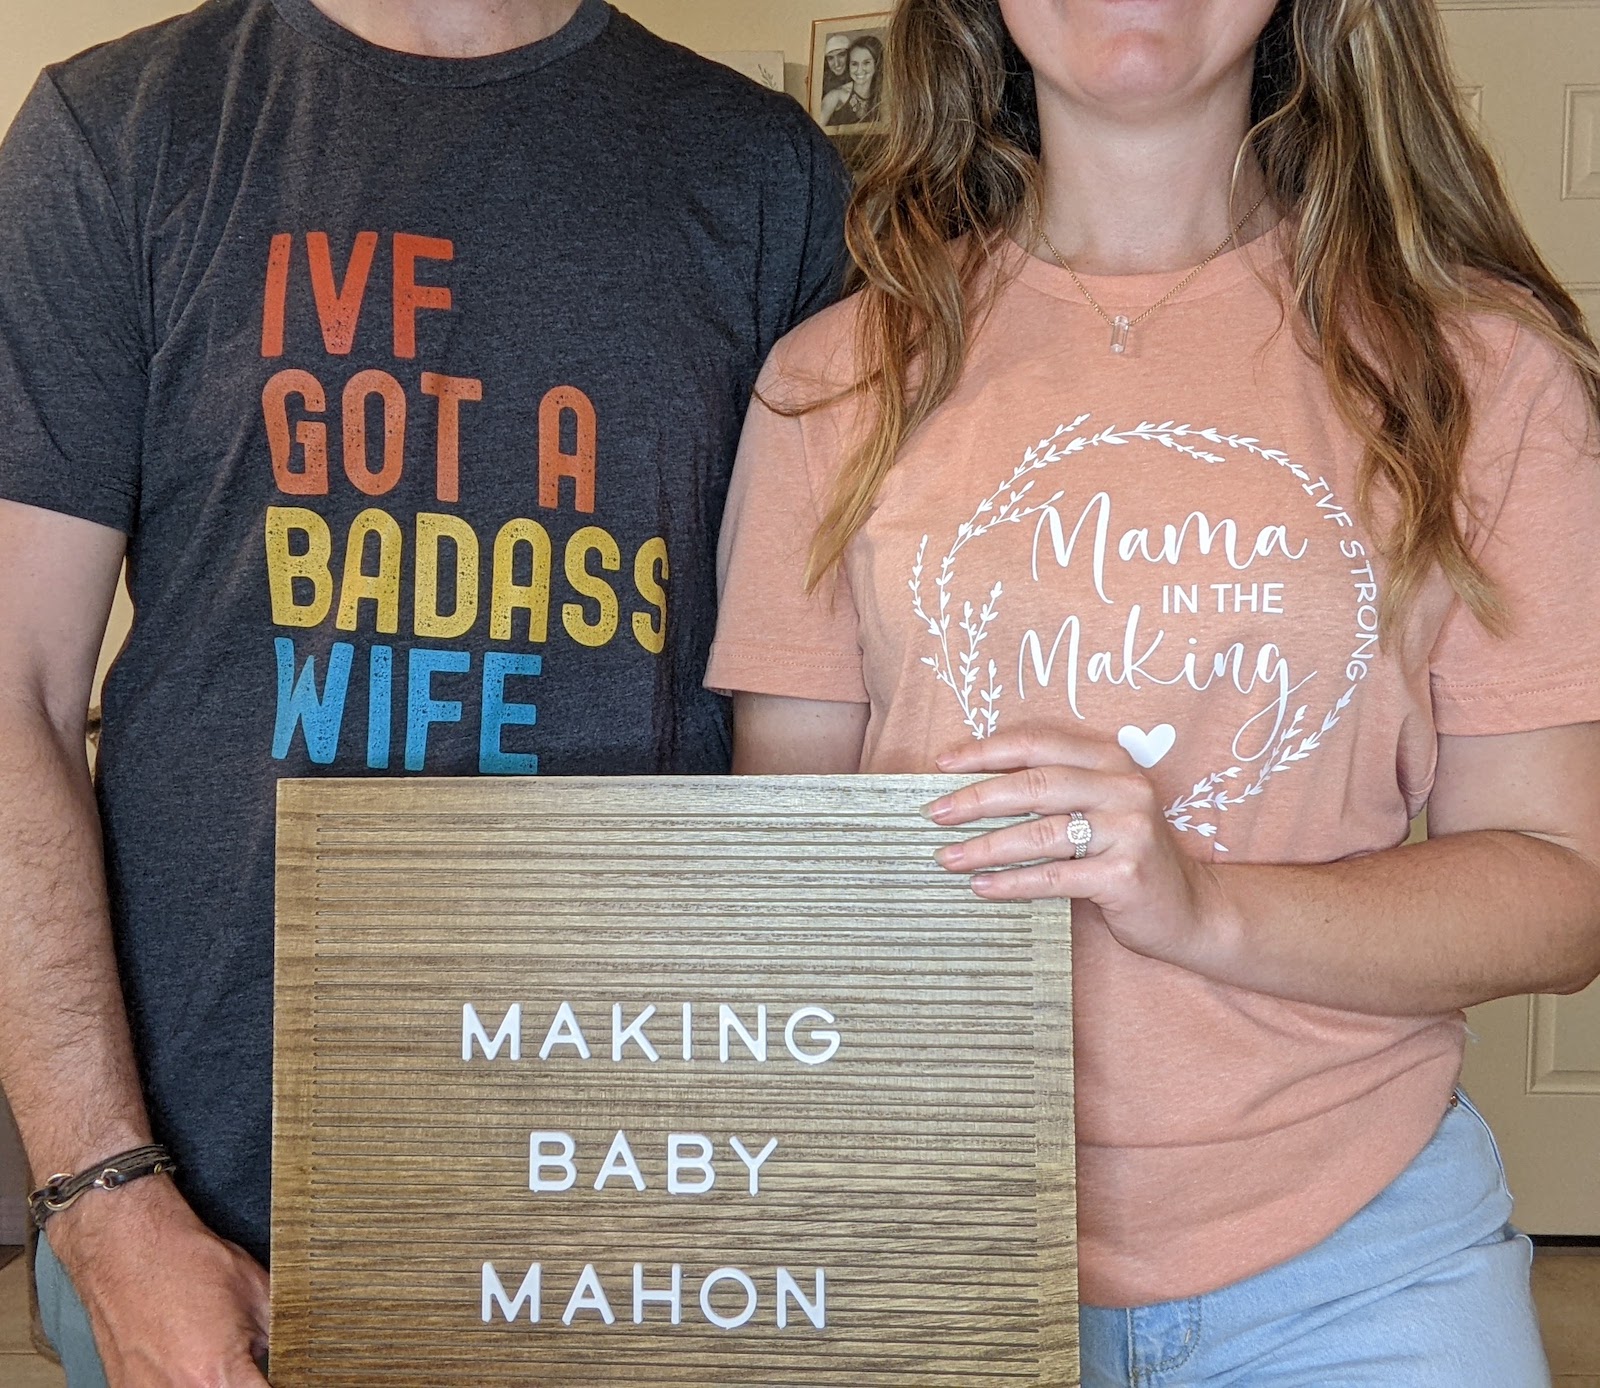 A couple wear shirts that say 'ivf got a badass wife' and 'mama in the making' in front of a wooden sign that says 'making baby mahon'